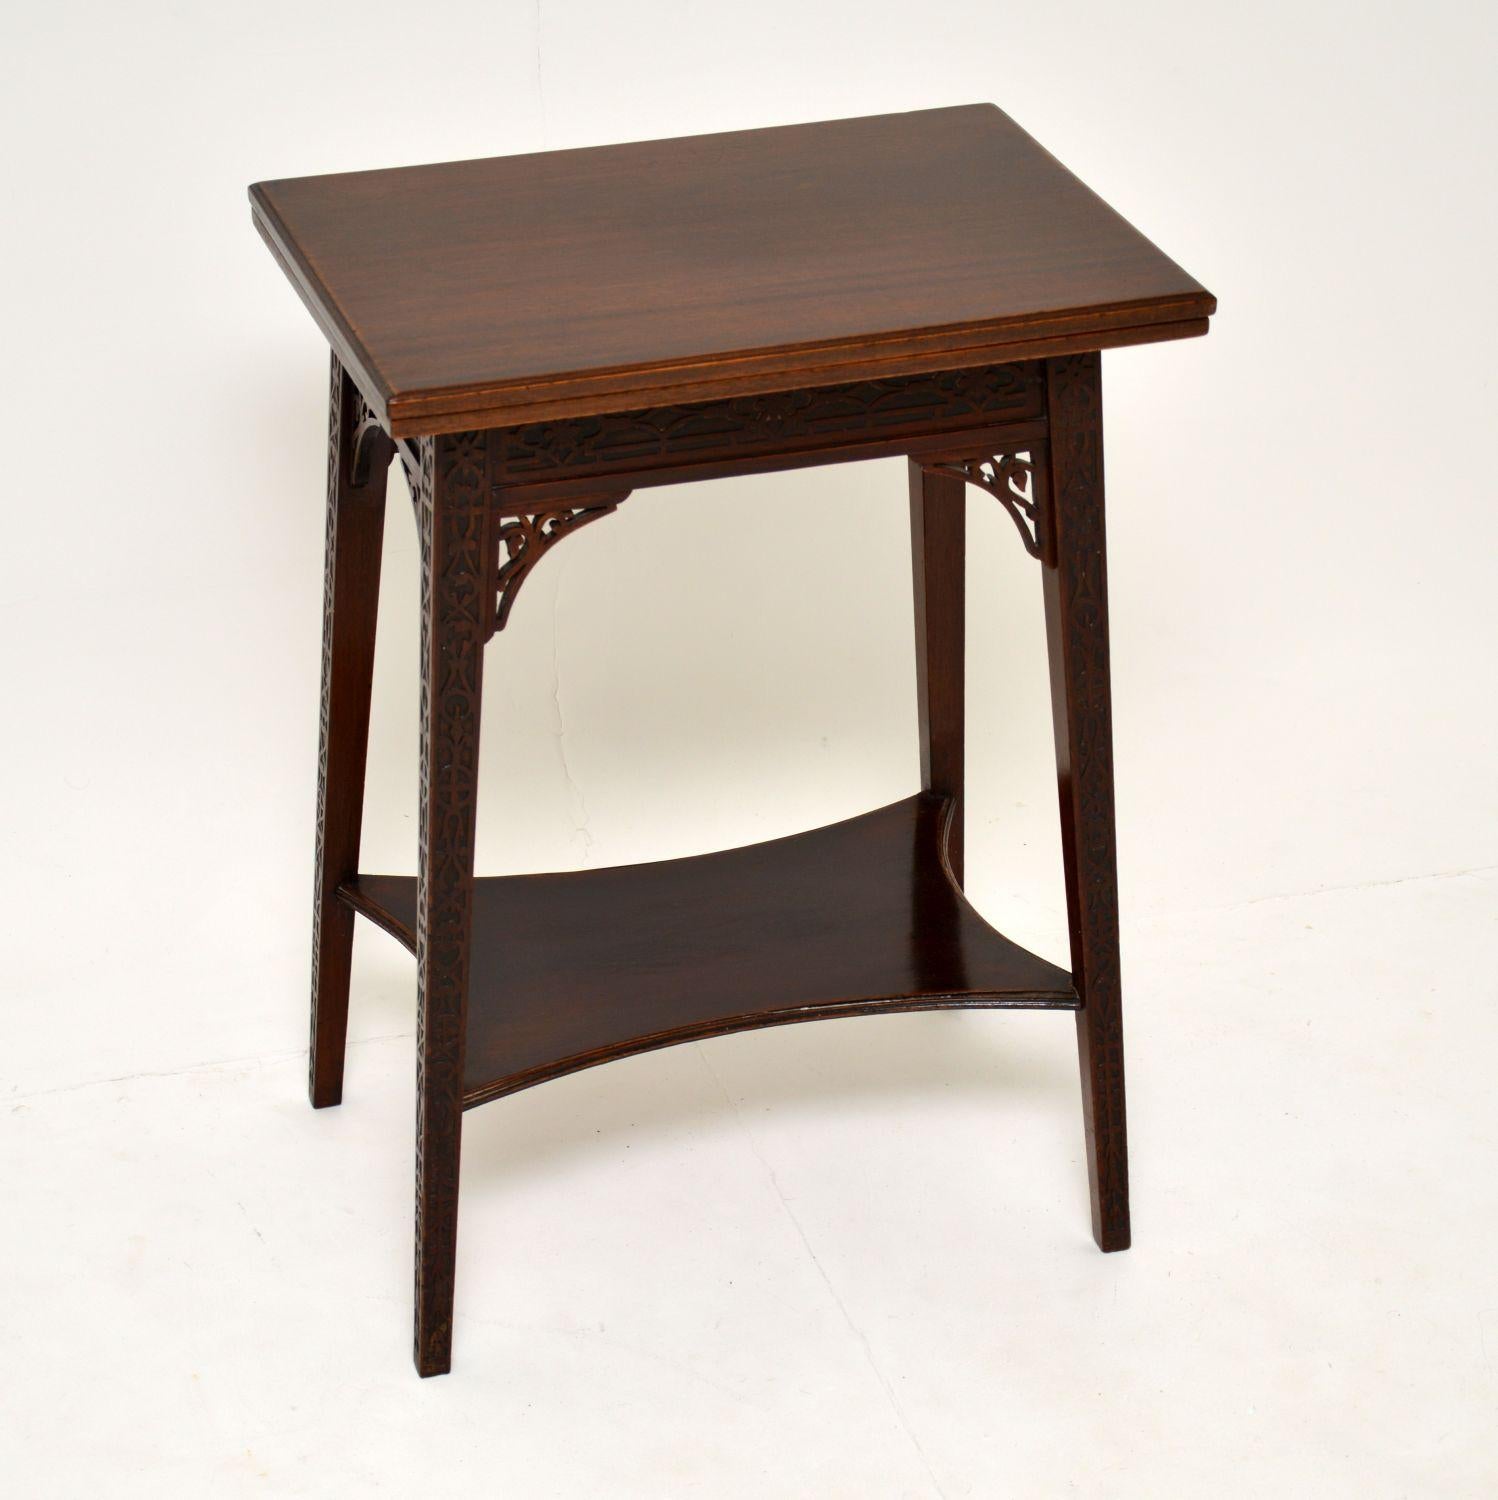 This stunning and unusual antique Edwardian side table, has a flap over top which doubles the top surface and turns it into a tea table or card table. This is beautifully made of wood, it dates from the 1890-1900 period.

There is fine carving all